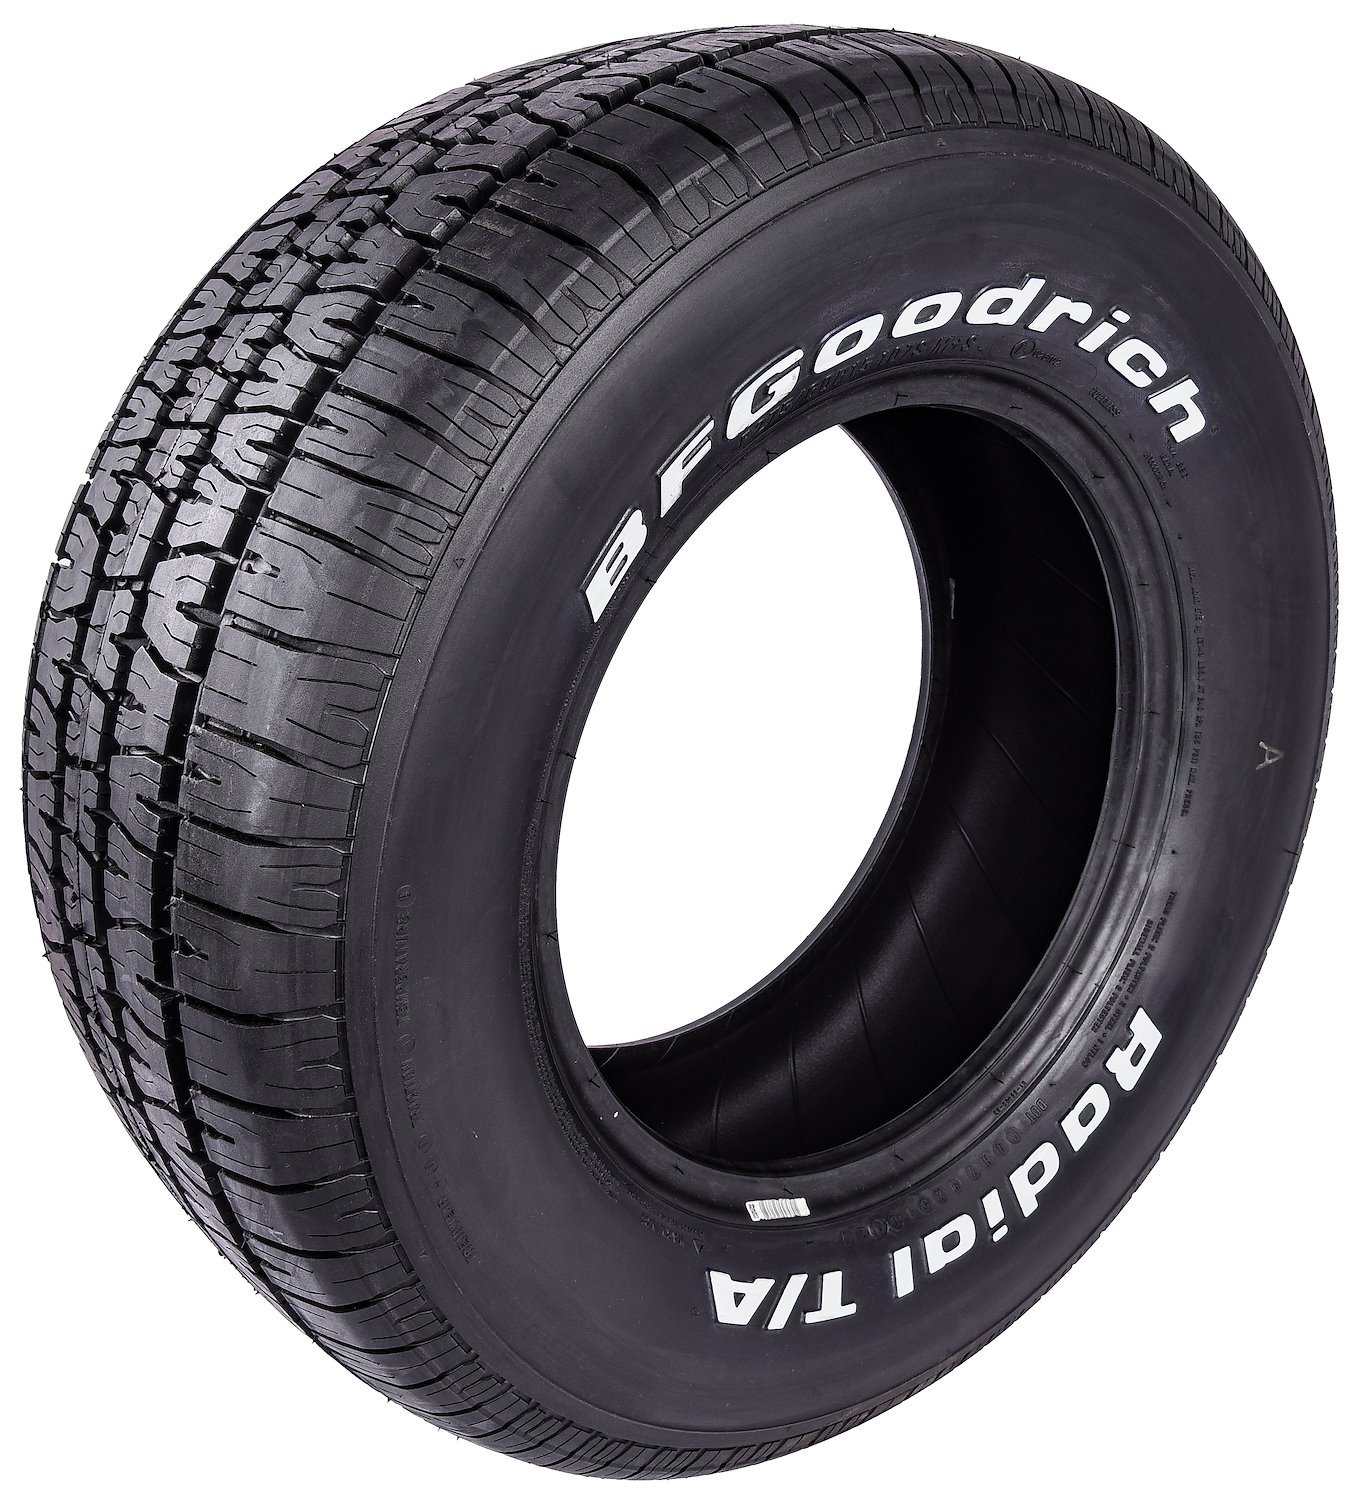 Radial T/A Tire P275/60R15